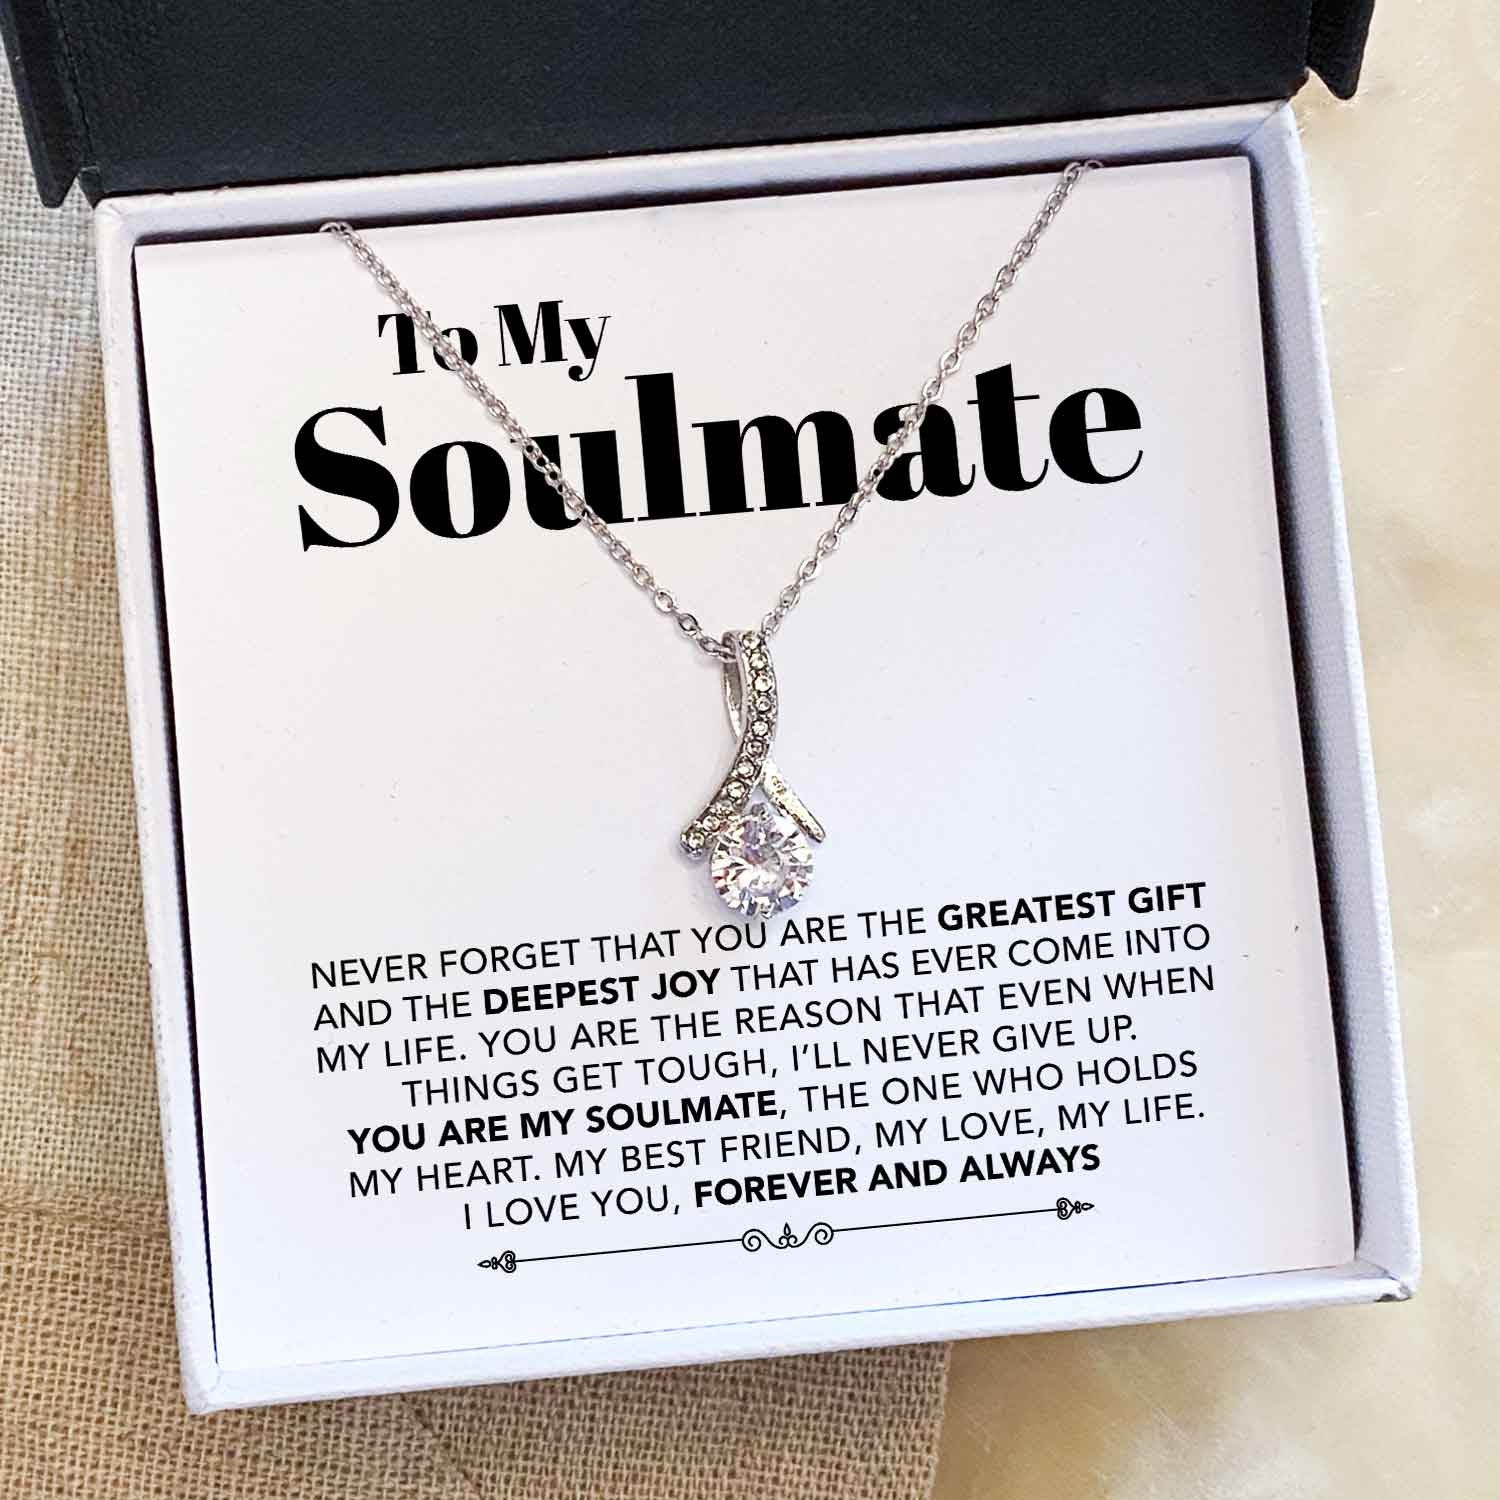 To My Soulmate Necklace - My Best Friend/ My Love/ My Life